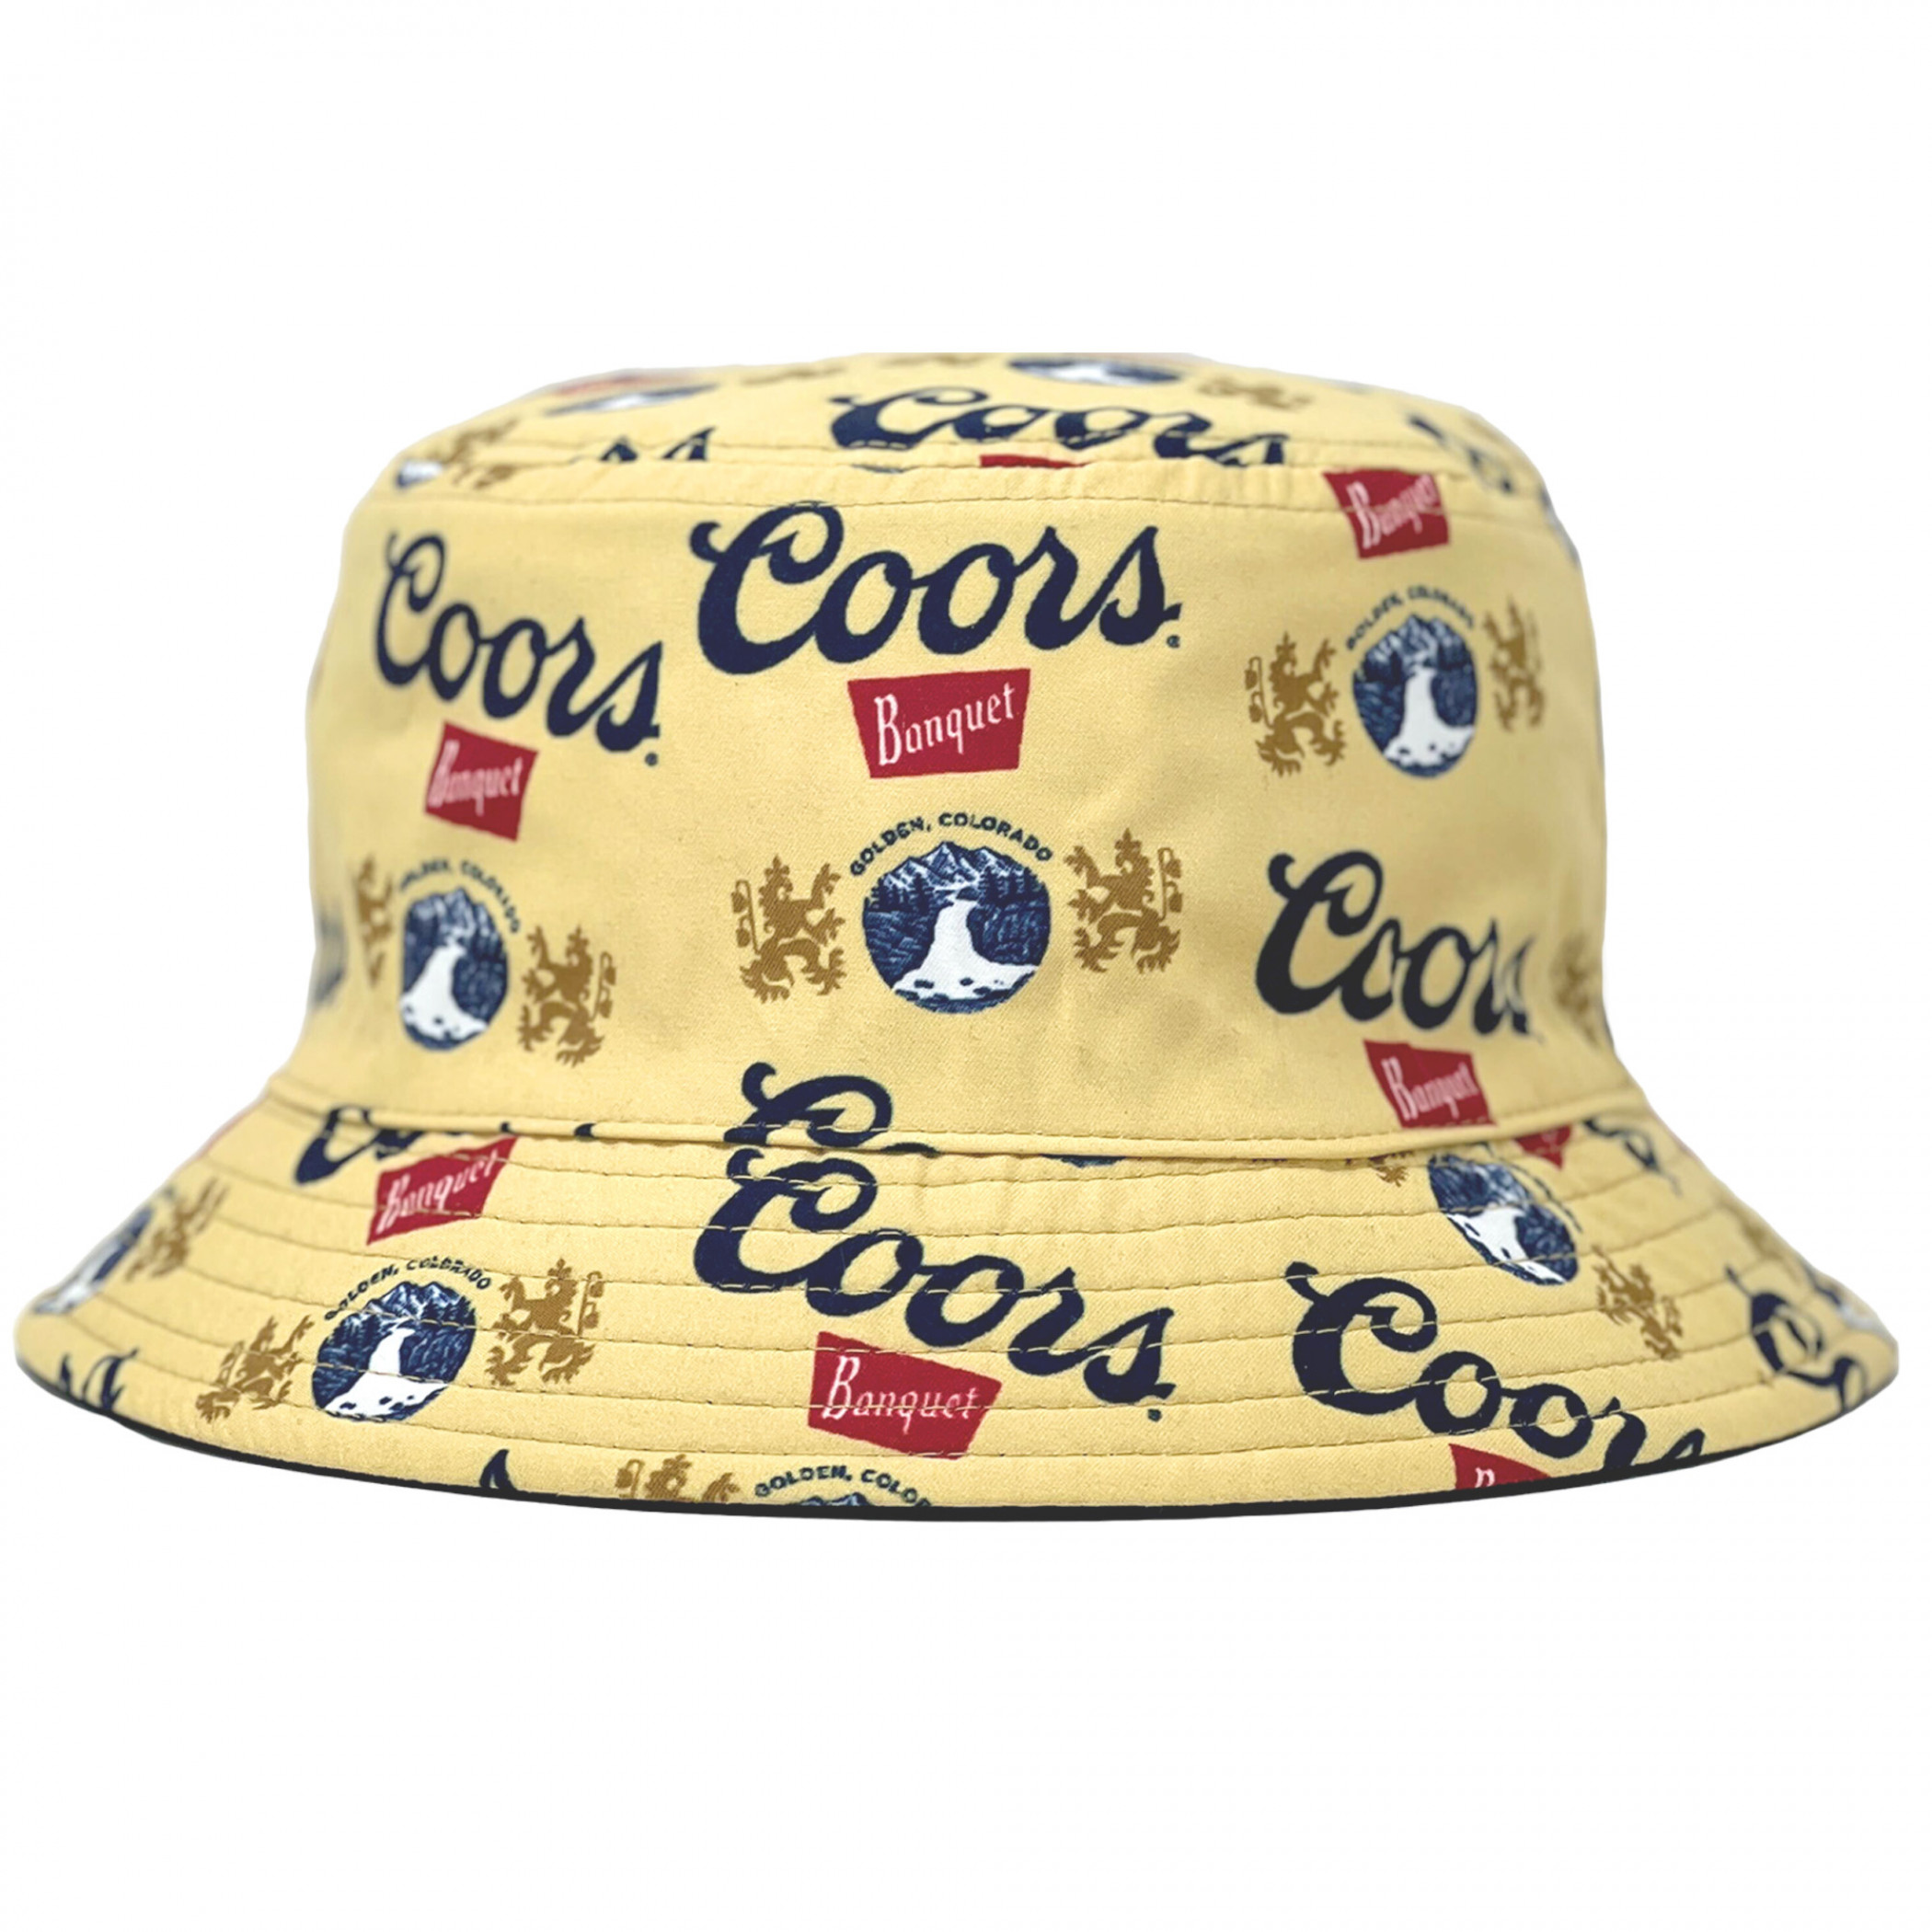 Coors Banquet Beer Brand and All Over Logos Reversible Text Bucket Hat